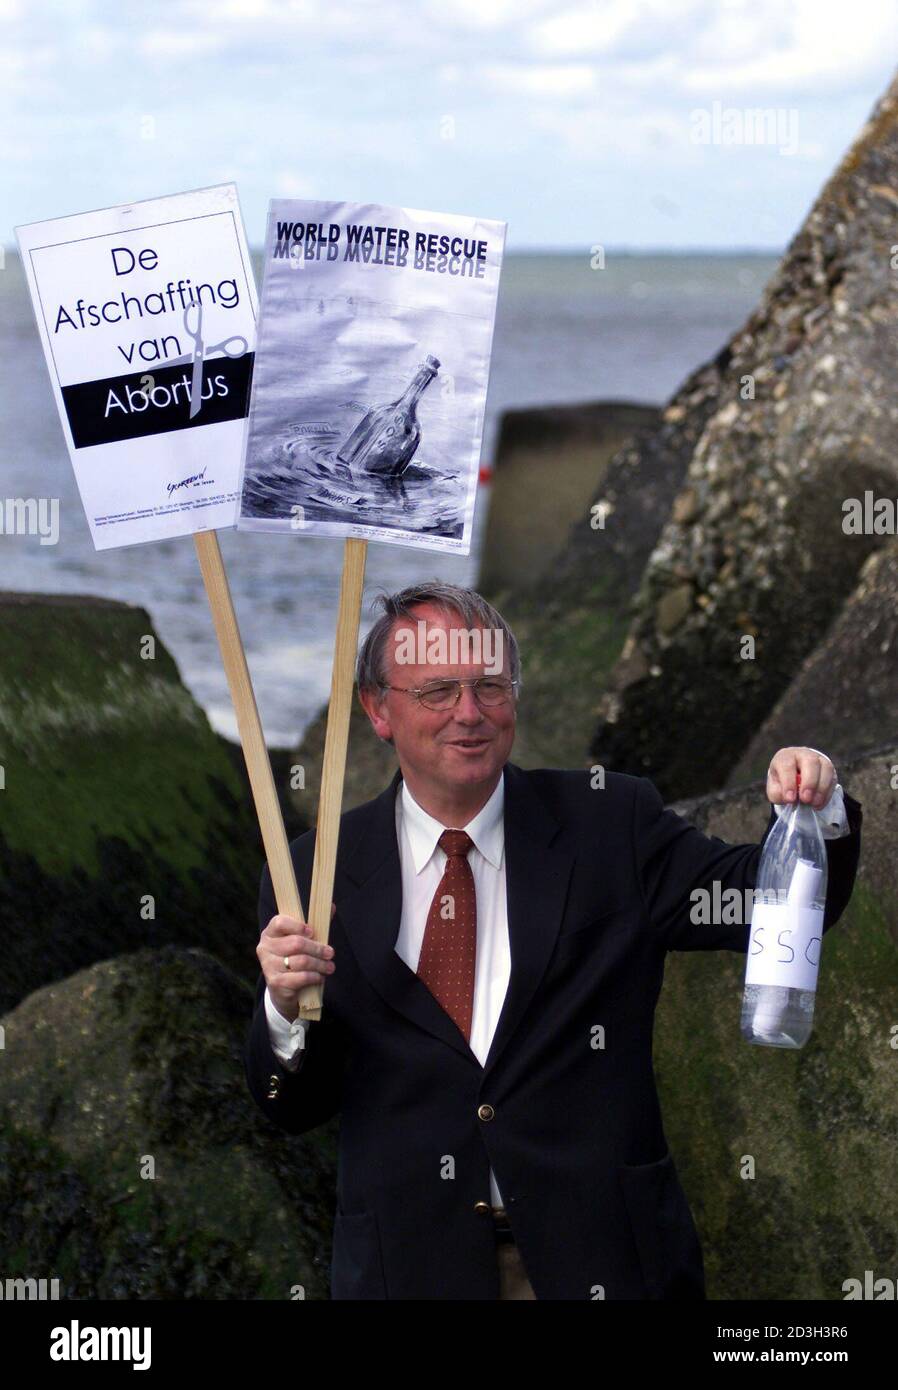 President of the Cry for Life movement Bert Doorenbos holds a bottle containing an anti abortion message into the sea as he holds two banners one reading ' abolition of abortion ' at The Dutch Port of Hoek van Holland, as a protest to the departure of  the Dutch abortion ship Aurora, rechristened the Sea of Change, June 11, 2001. The ship offering onboard abortions departed for Ireland facing a likely wave of protests  and the threat of legal actions at home. The ship, a converted fishing boat rechristened the Sea of Change, pushed off from its berth beside a Greenpeace vessel in the Dutch sma Stock Photo